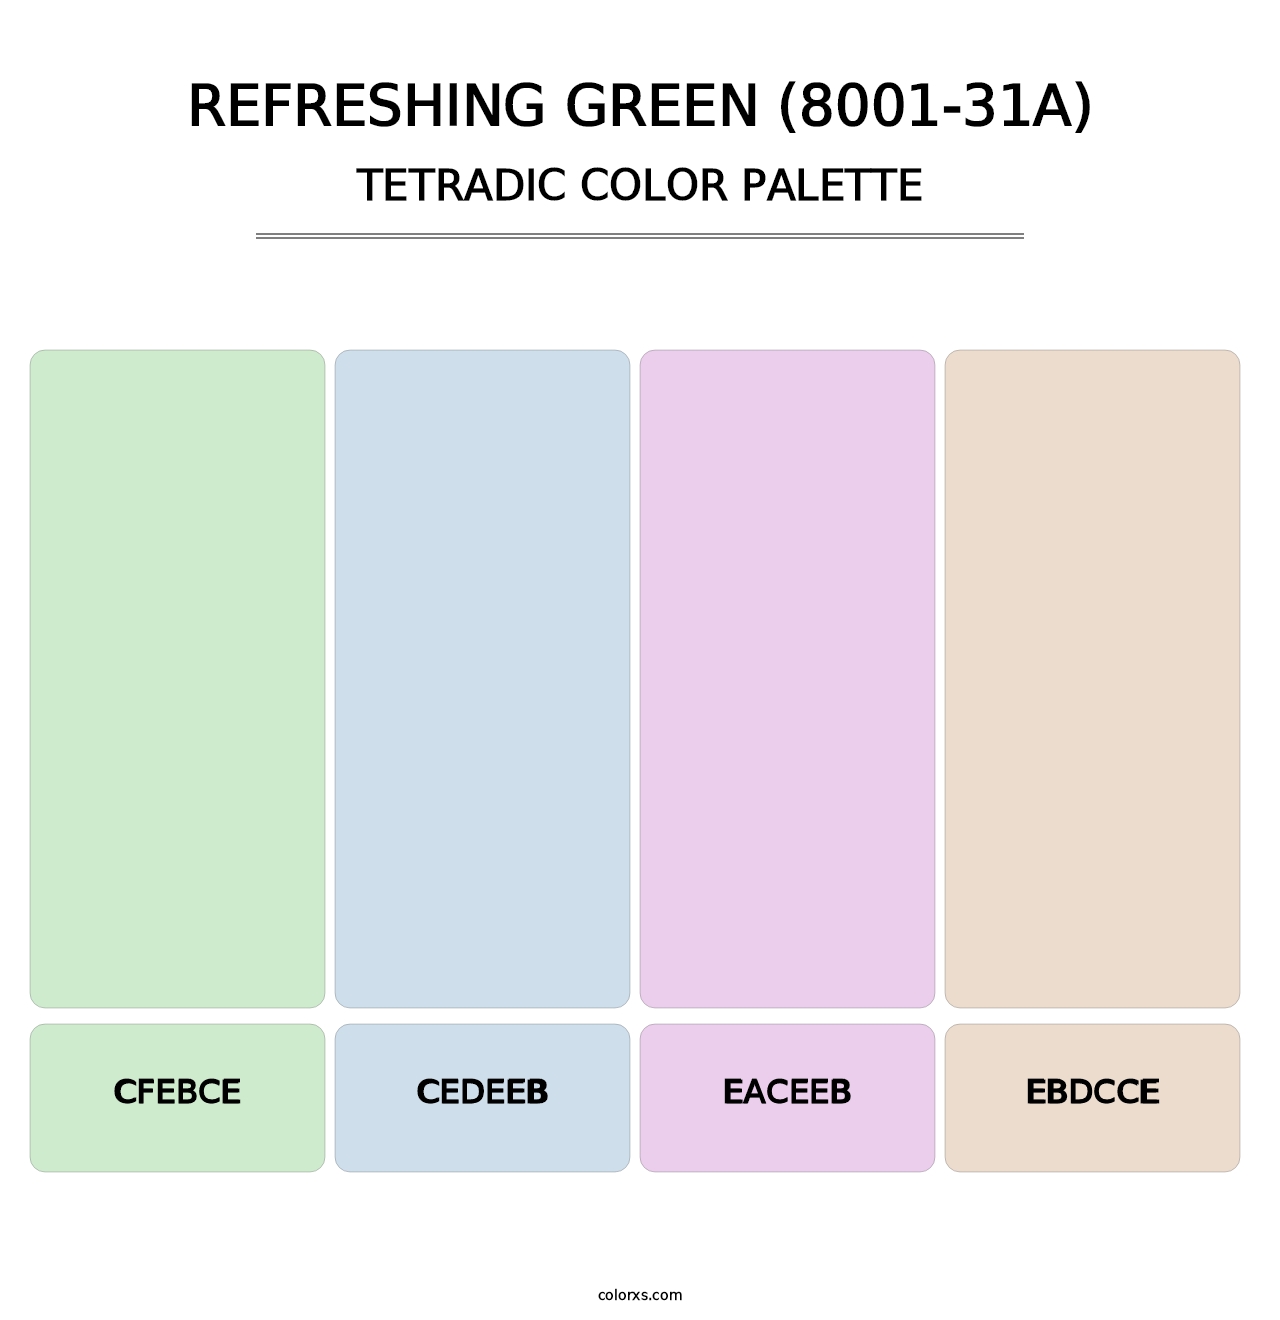 Refreshing Green (8001-31A) - Tetradic Color Palette